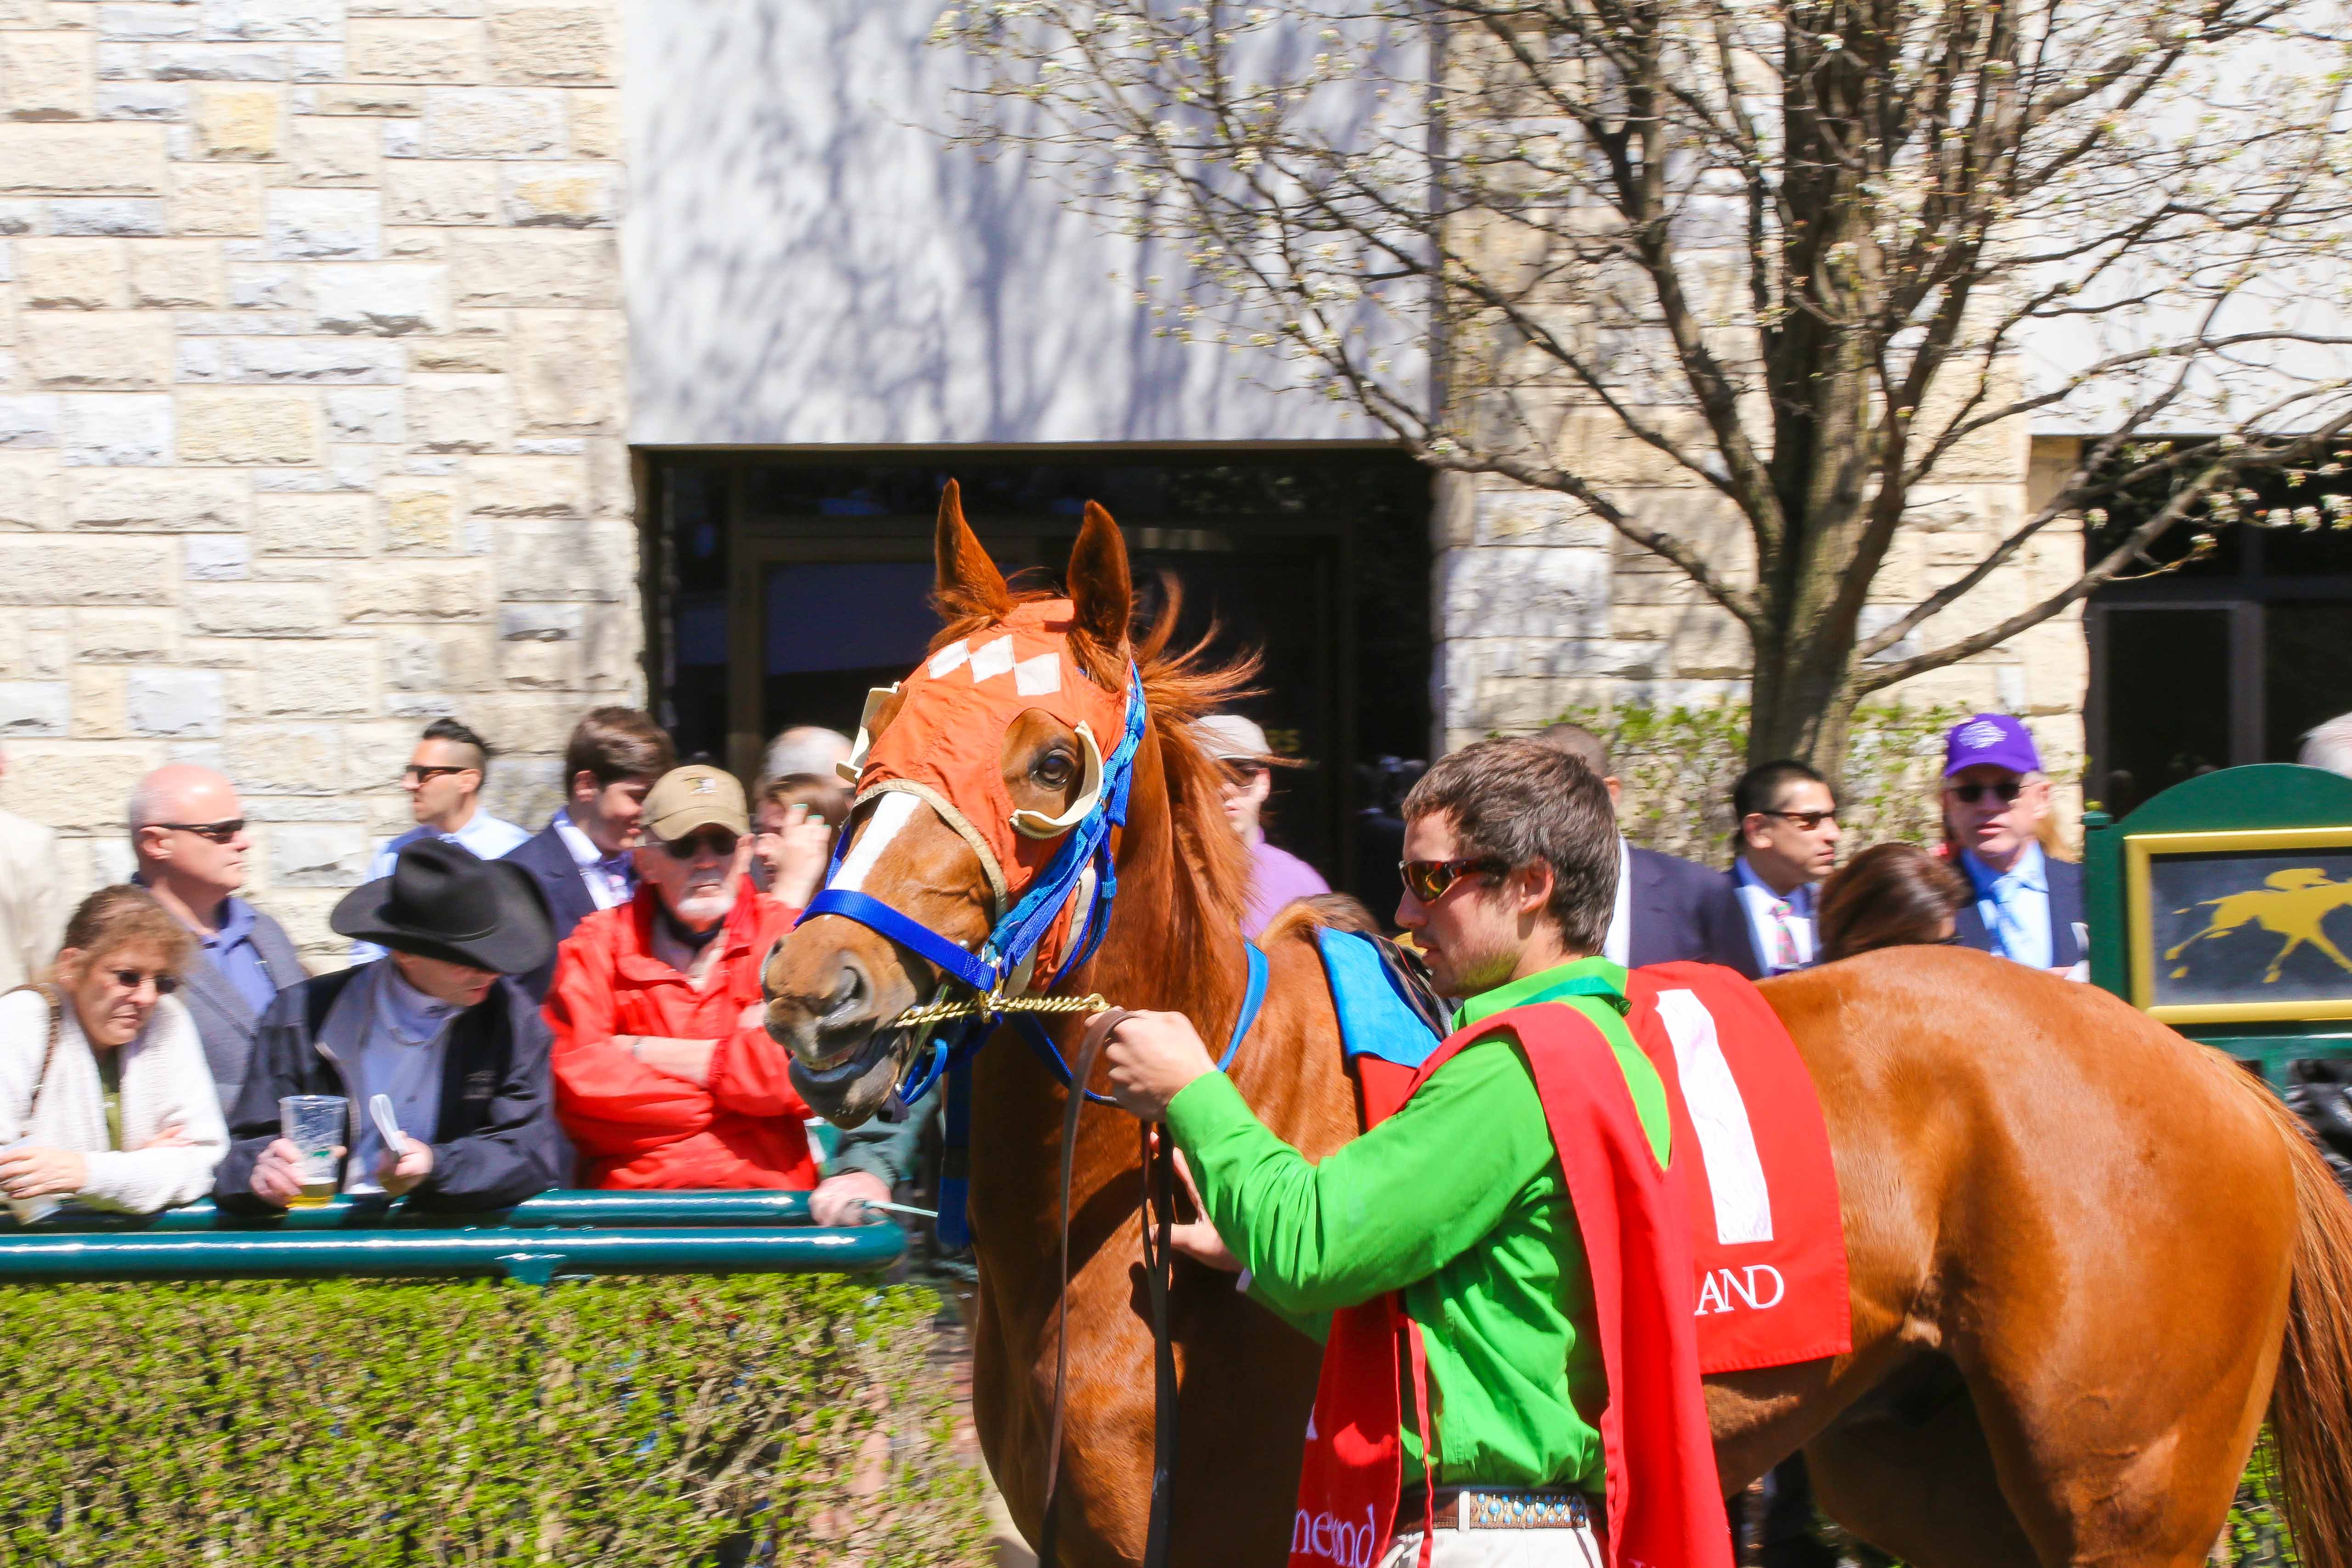 Keeneland in Kentucky: How to Plan a Day at the Races